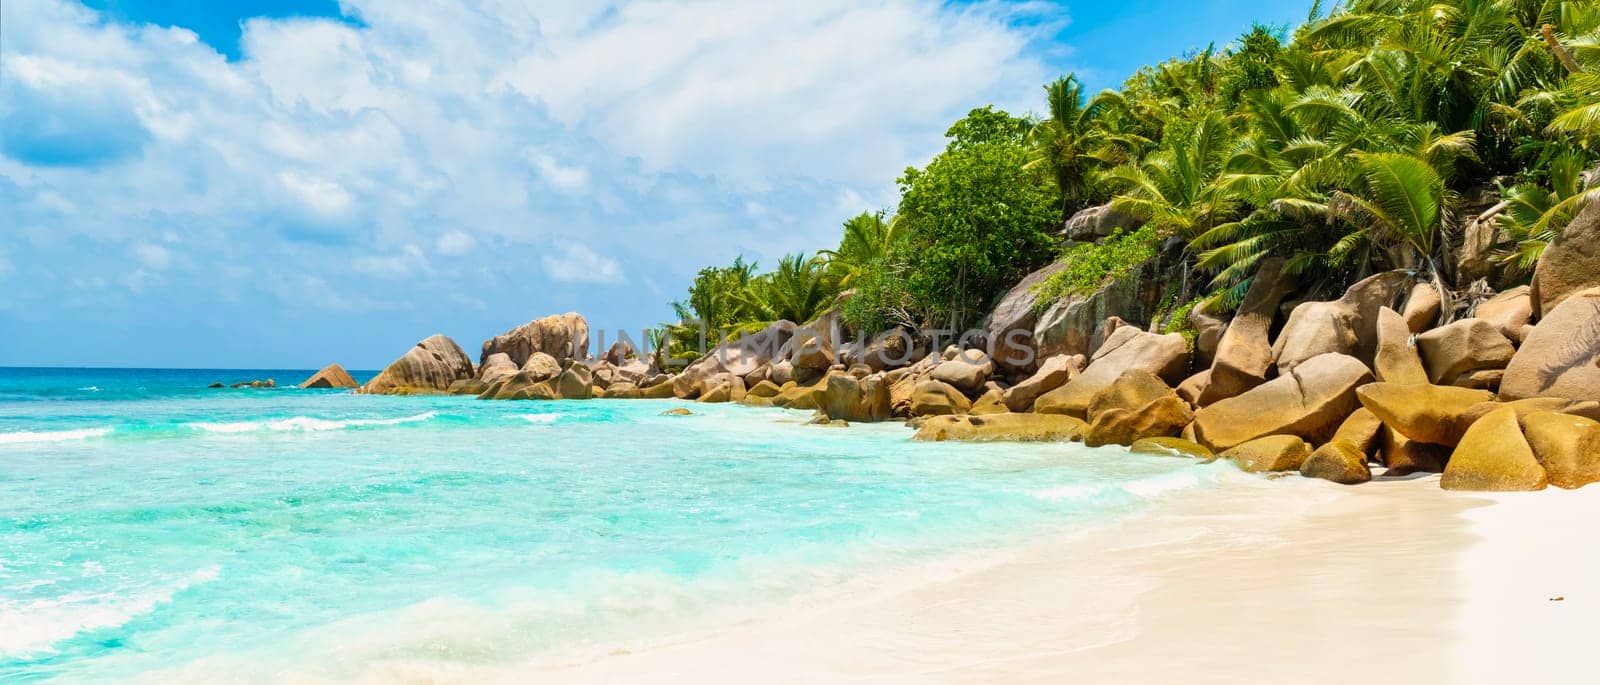 Grand Anse Beach La Digue Seychelles Islands, white tropical beach with turquoise colored ocean by fokkebok